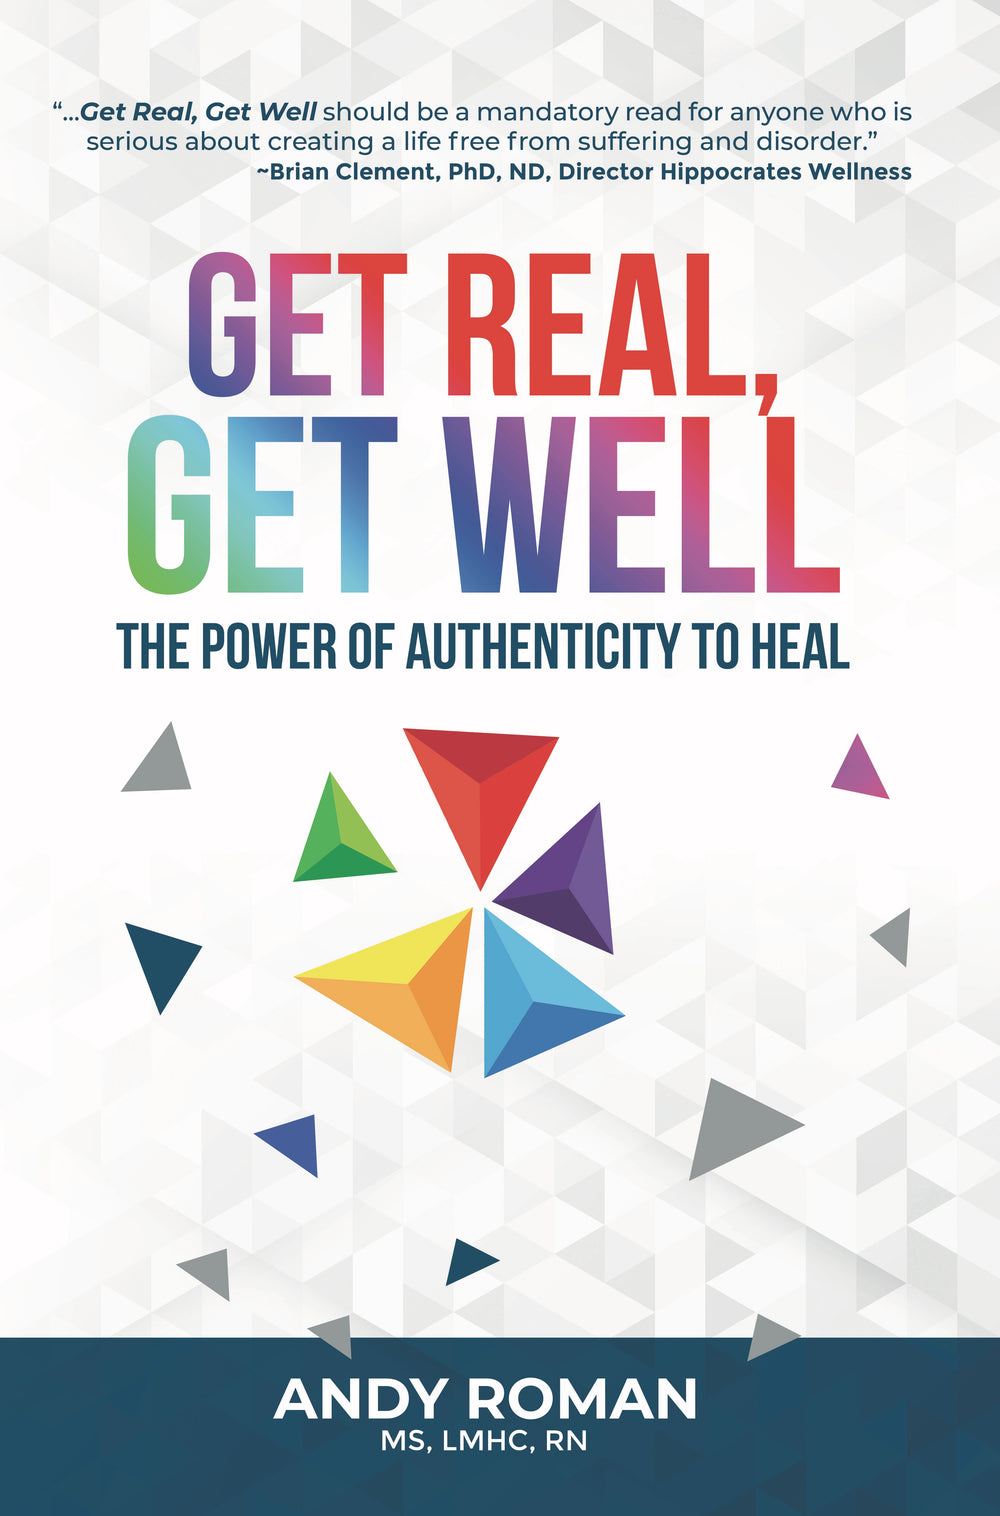 Get Real, Get Well, The Power of Authenticity to Heal